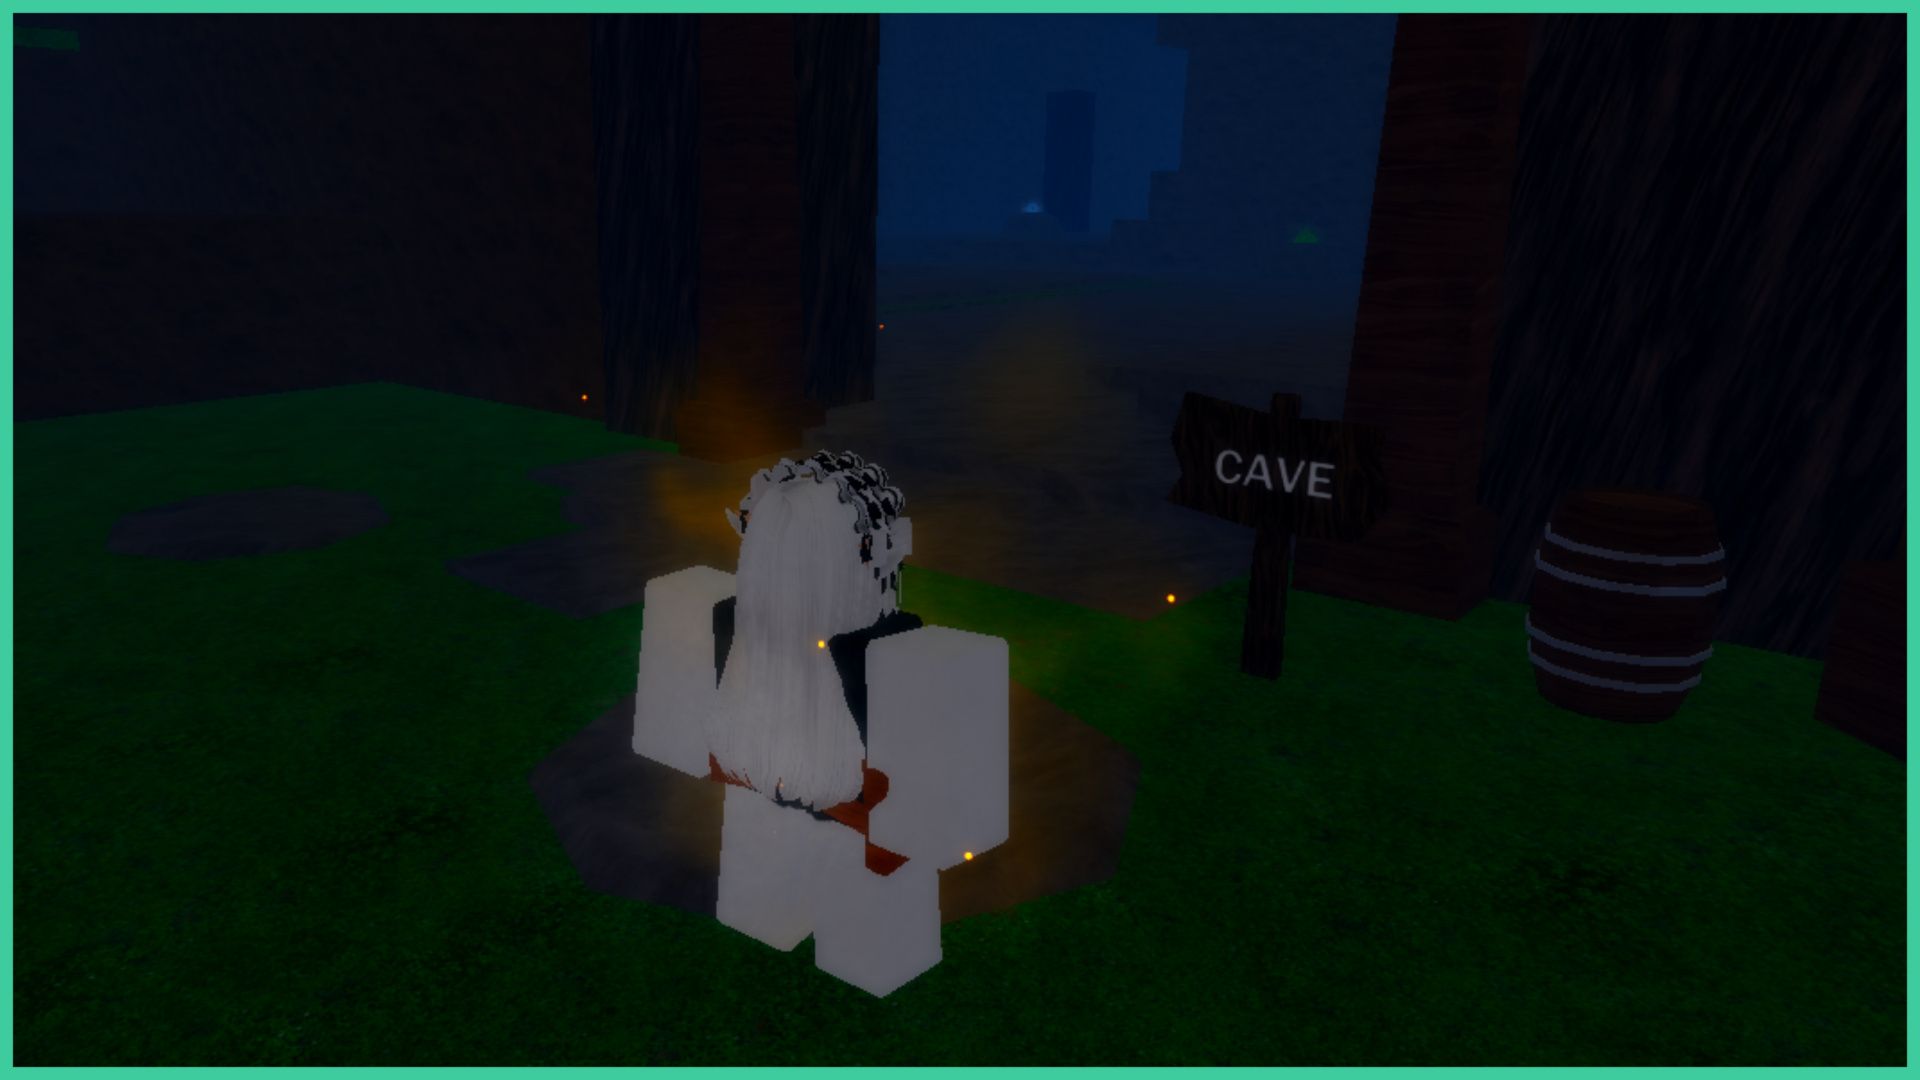 feature image for our grimoires era abilities, the image features a screenshot of a roblox player standing outside a cave entrance with a wooden sign outside that reads cave and a wooden barrel, there are glowing items inside the cave